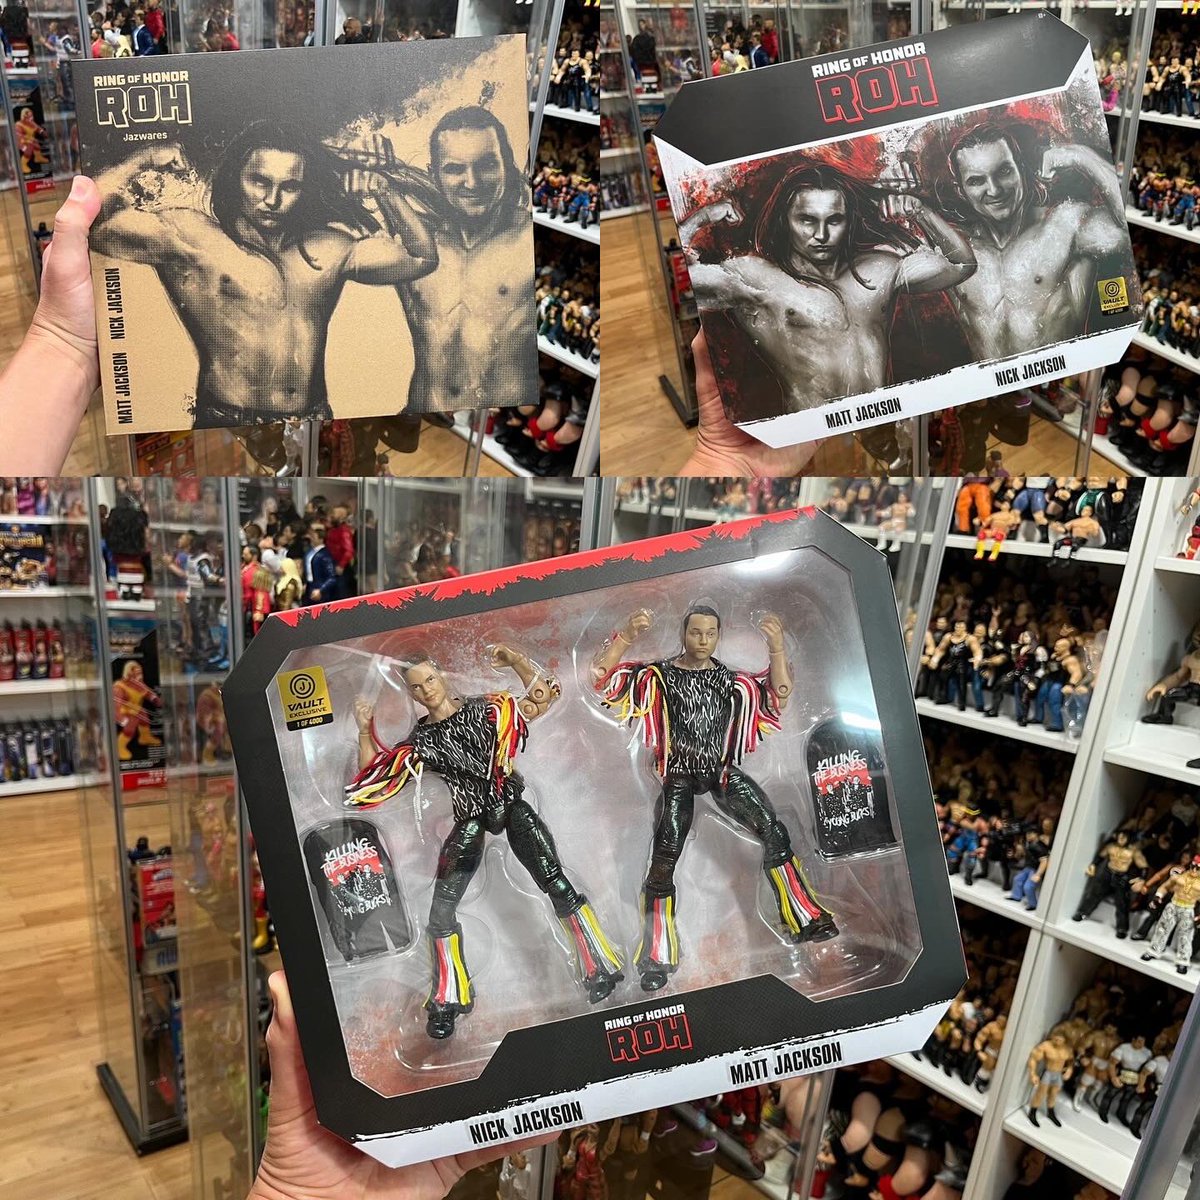 Even though I’m not crazy about the heads on these Bucks figures, I do love the presentation of the @jazwaresvault Ring of Honor series. I think that alone is enough to convince me to be a completist on these!

Follow @figheel & @casefreshpod on social media for action figure